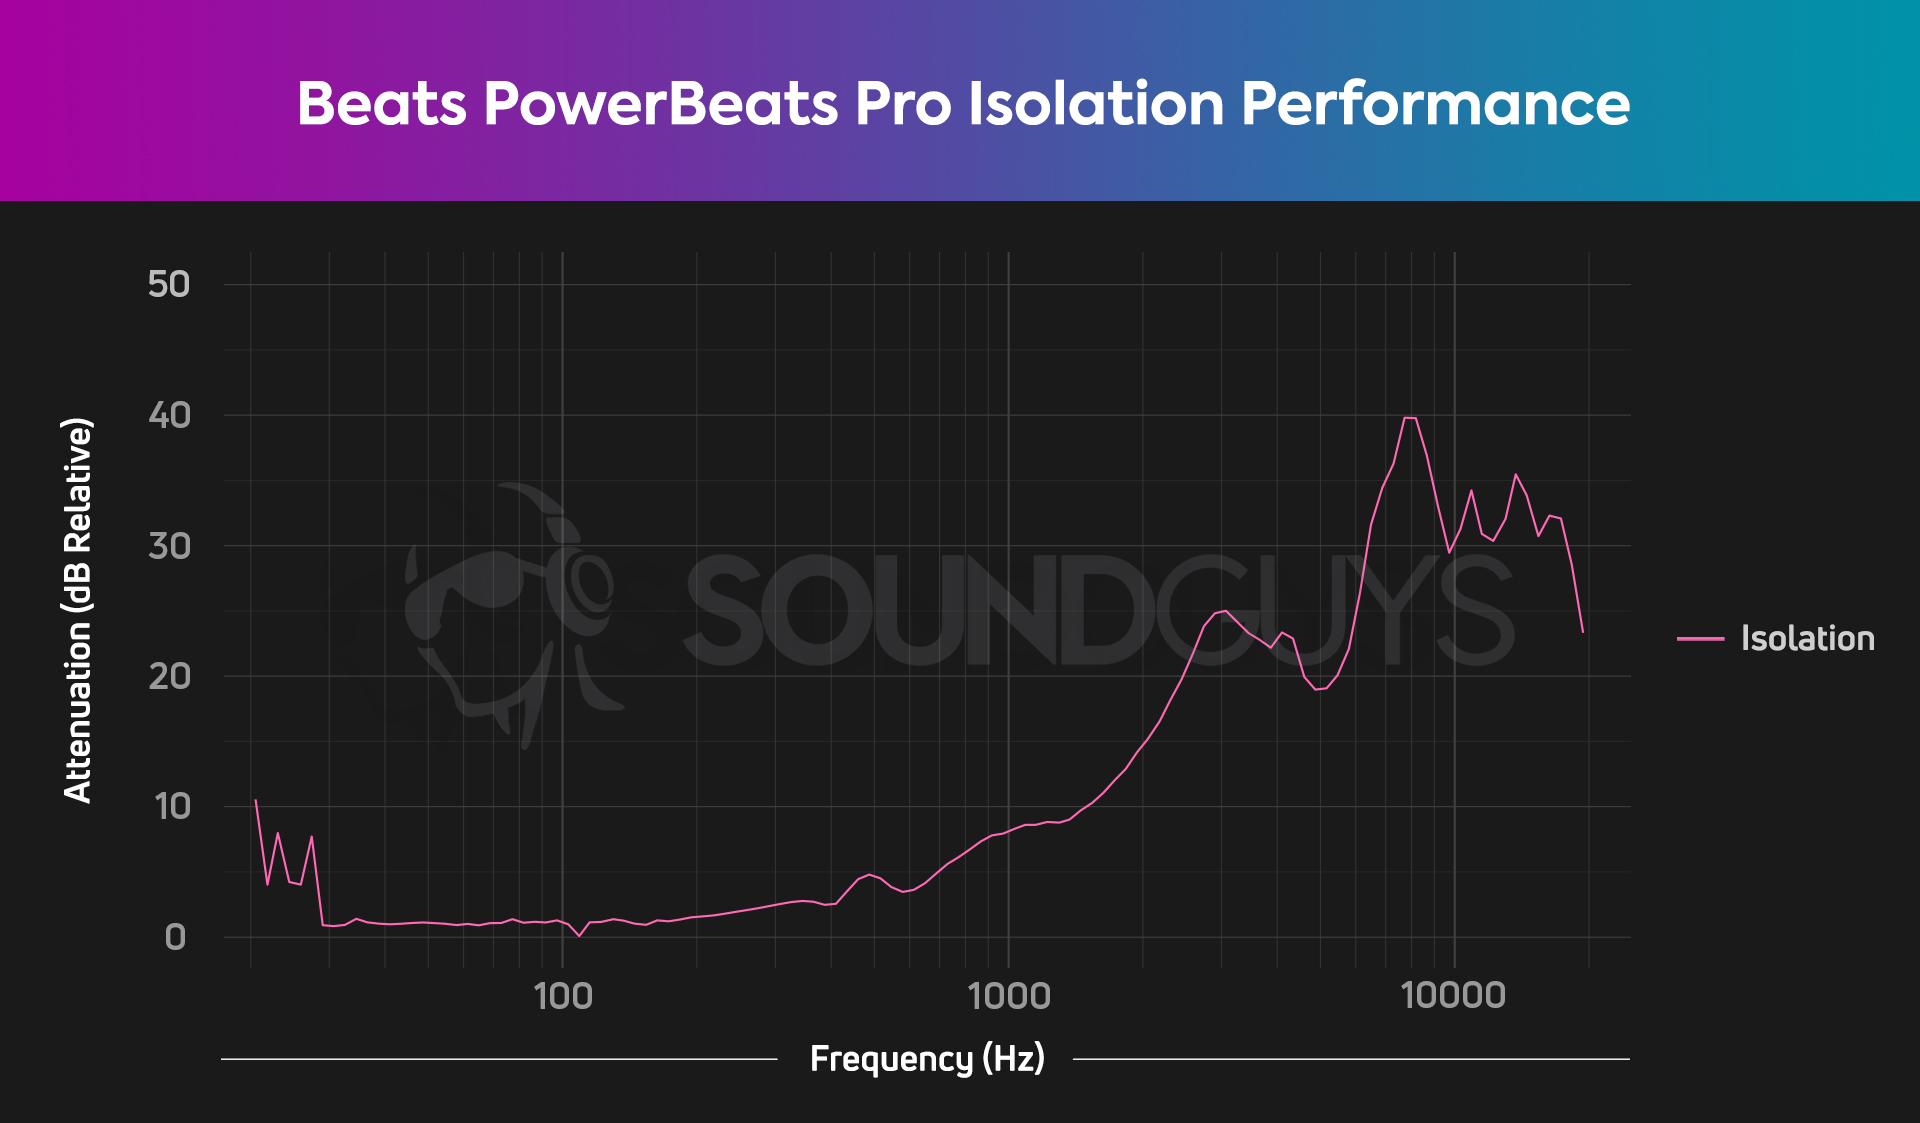 Beats Powerbeats Pro isolation chart. The frequencies above 1kHz are quieted to sound on-half to one-sixteenth their original perceived loudness.